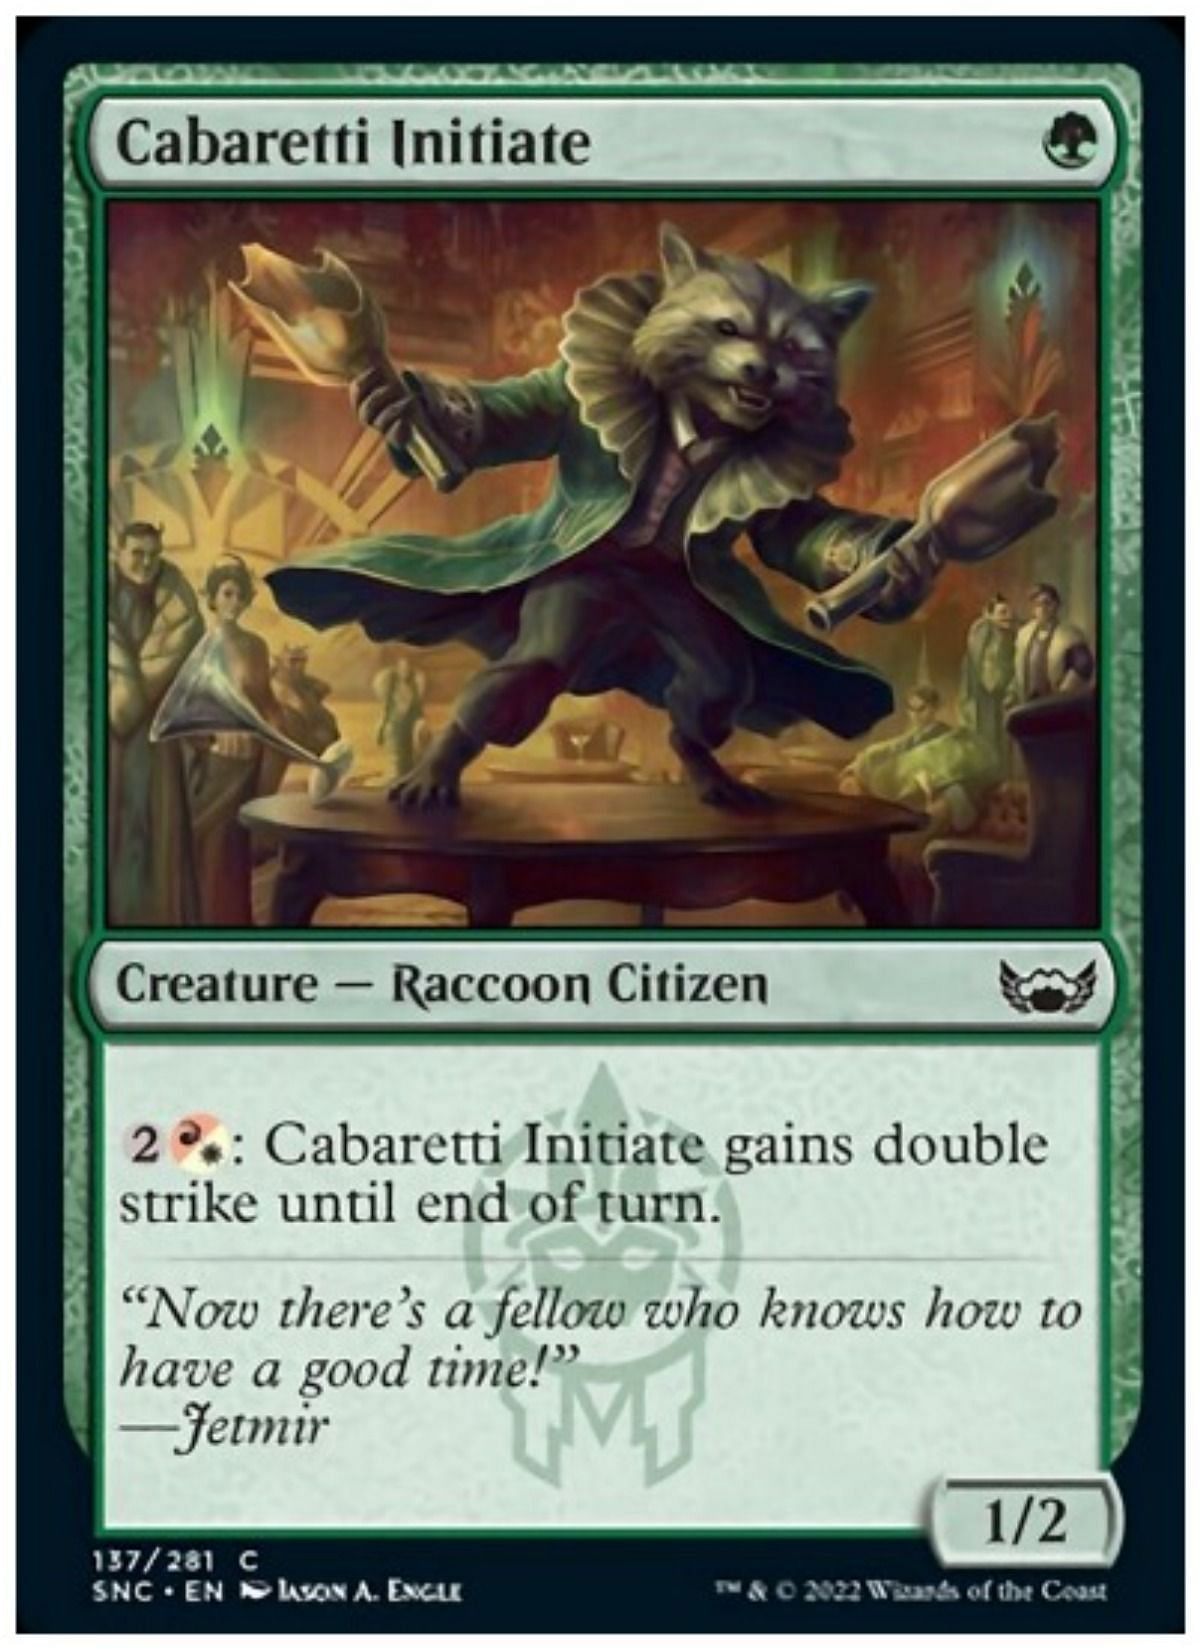 Cabaretti Initiate can double strike on a whim (Image via Wizards of the Coast)